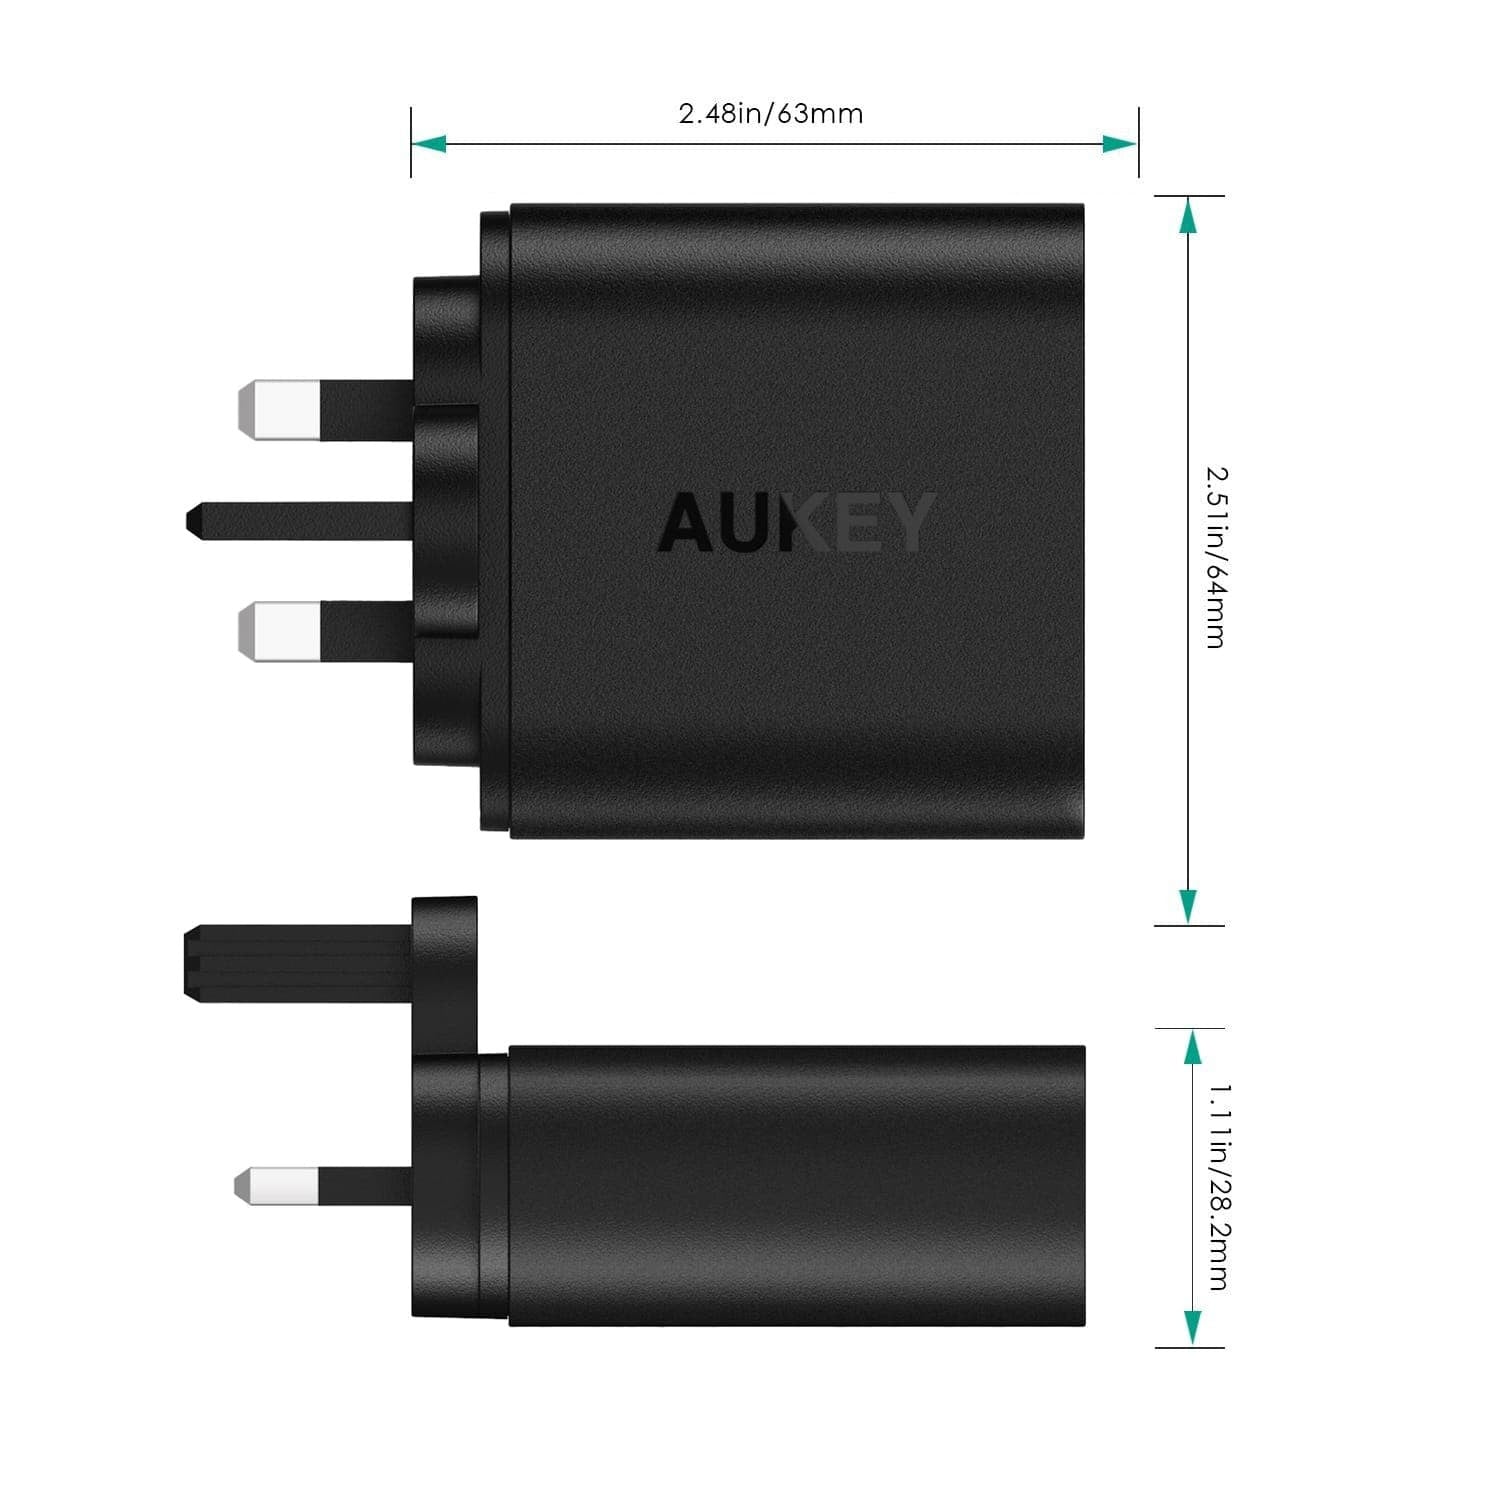 AUKEY PA-T16 Dual USB Qualcomm Quick Charge 3.0 Charger (UK Plug) - Aukey Malaysia Official Store